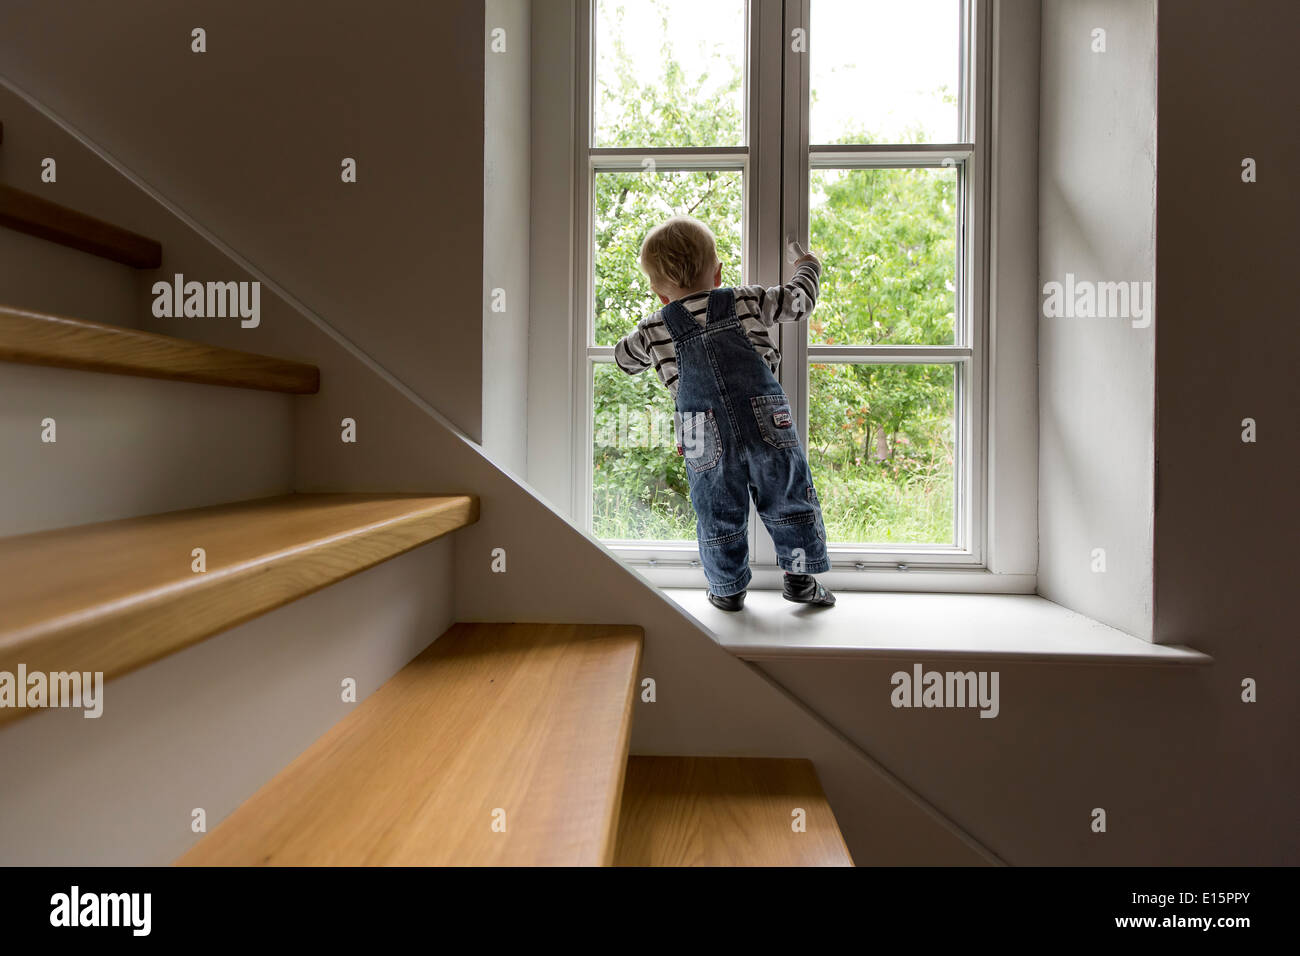 Infant, boy 1 year, looking out of the window into the garden, holding the window handle. Stock Photo